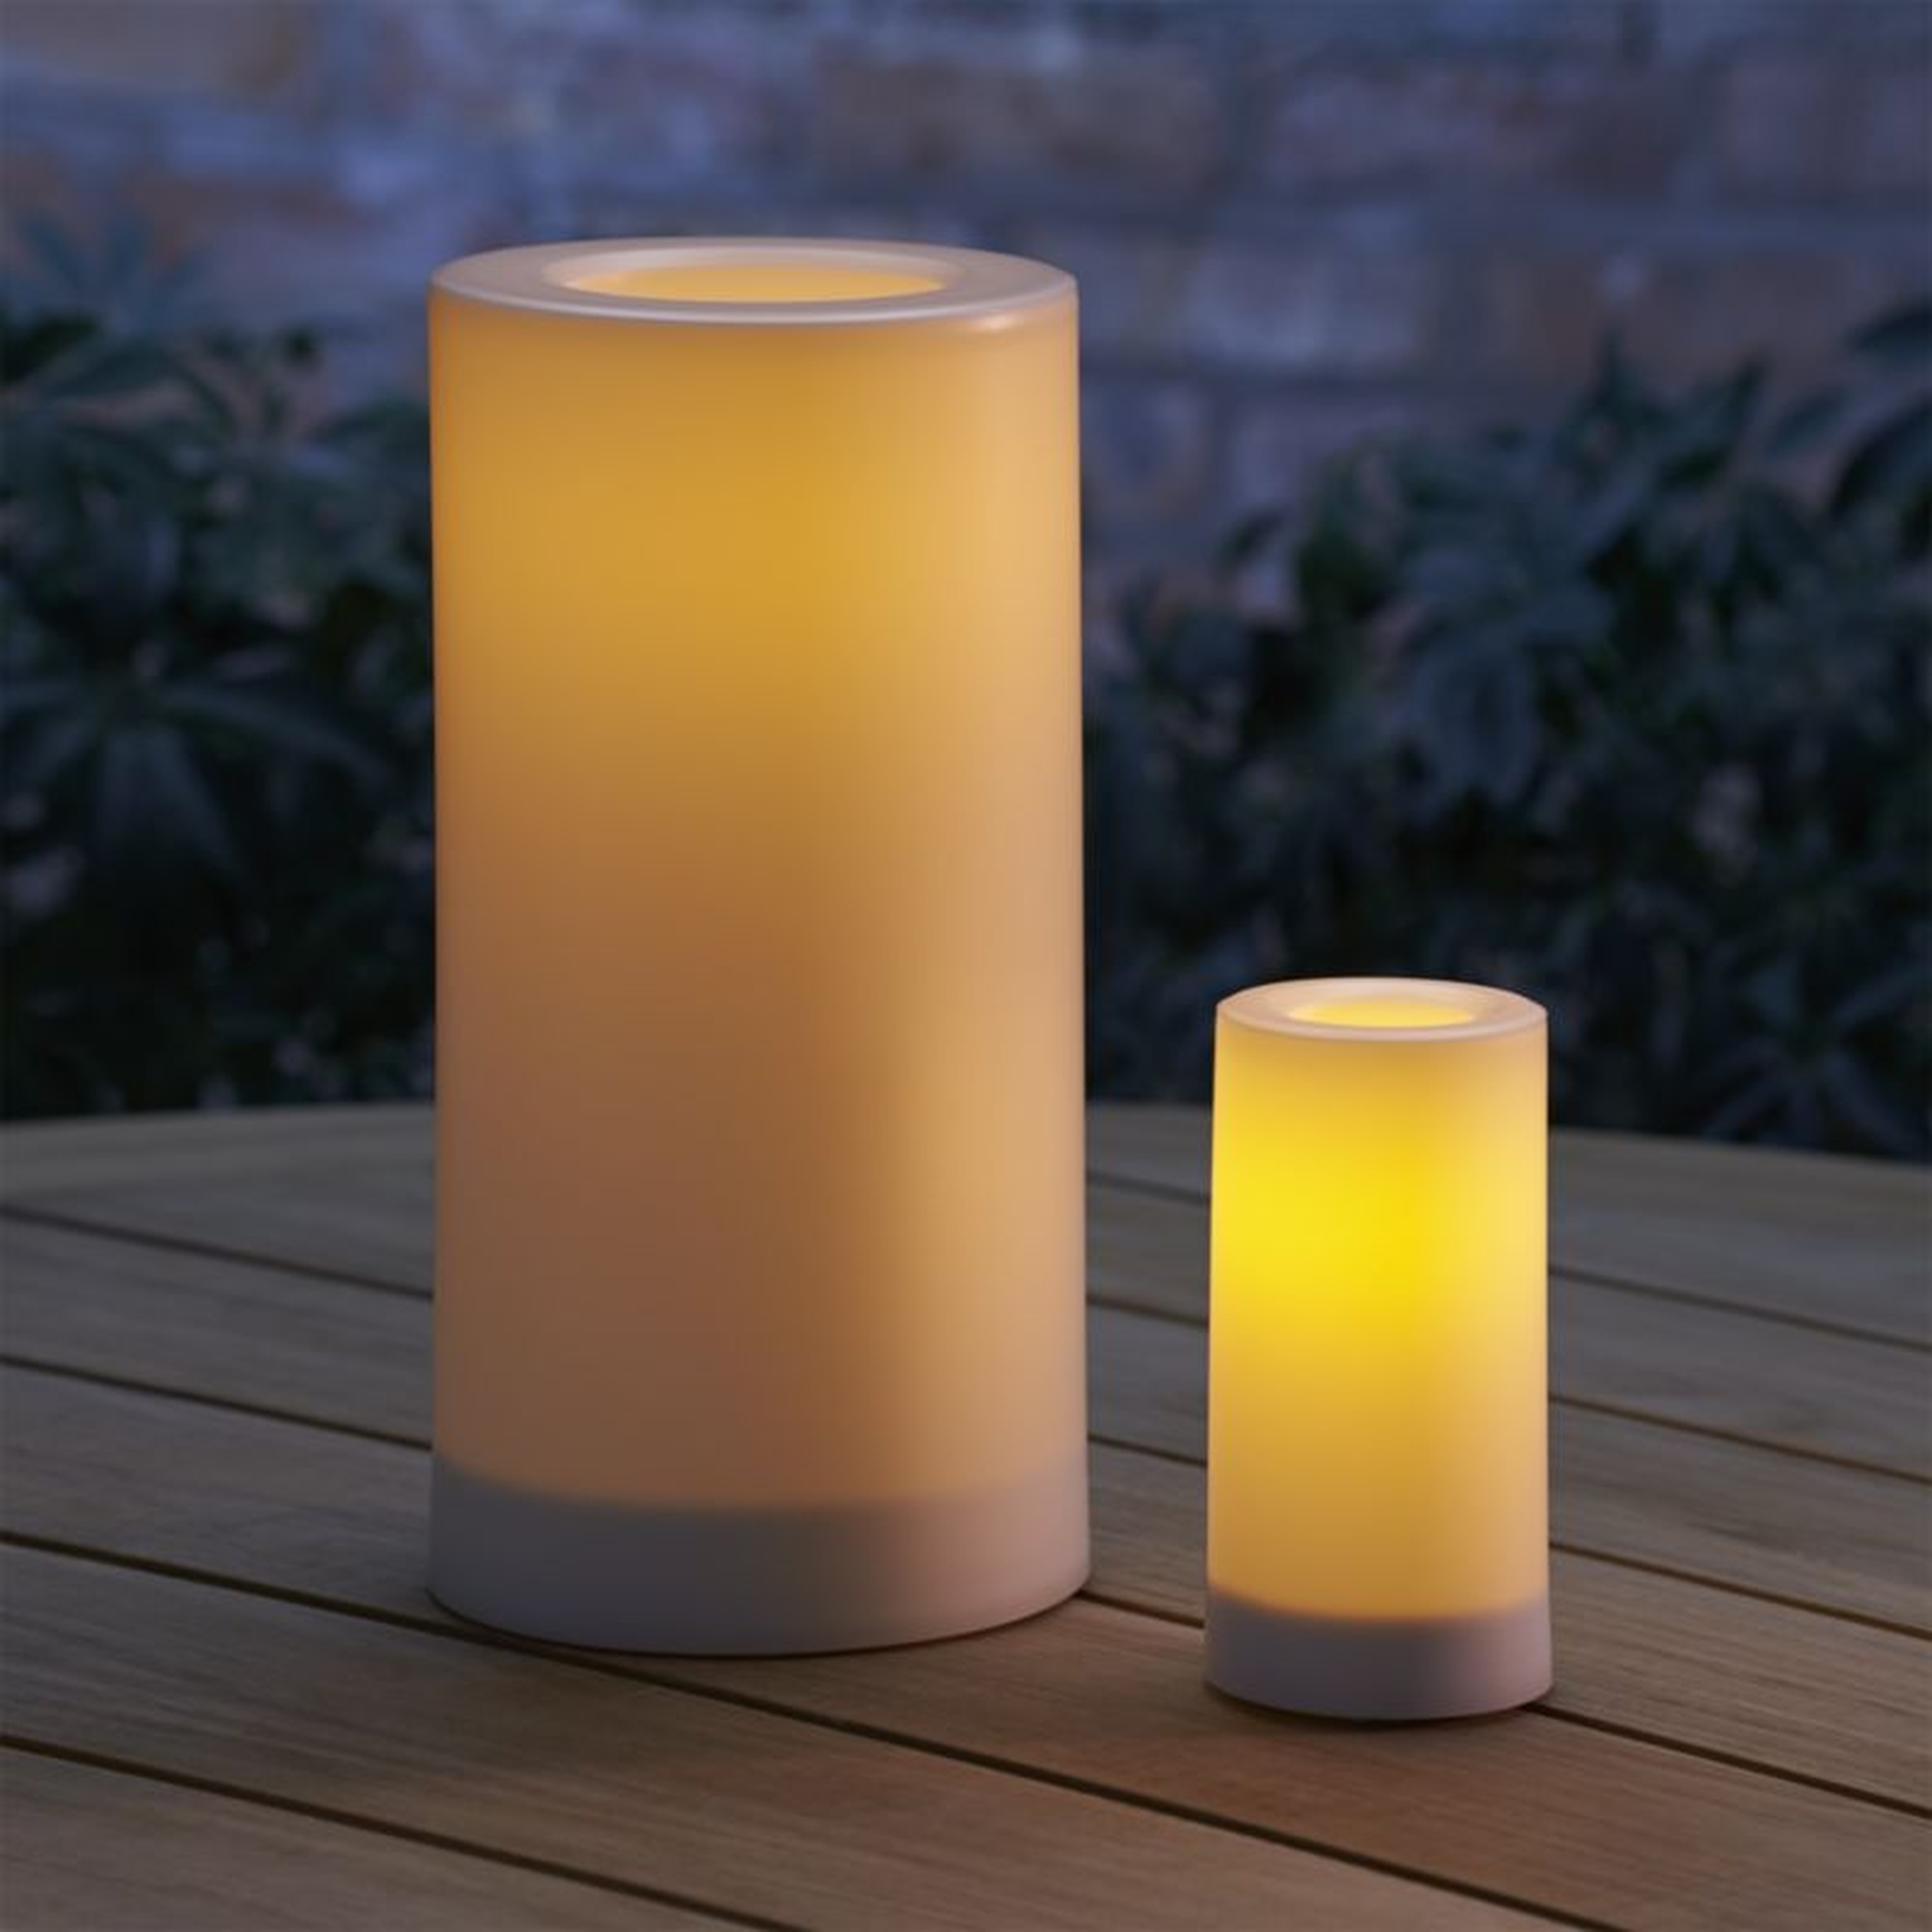 Indoor/Outdoor 4"x8" Pillar Candle with Timer - Crate and Barrel